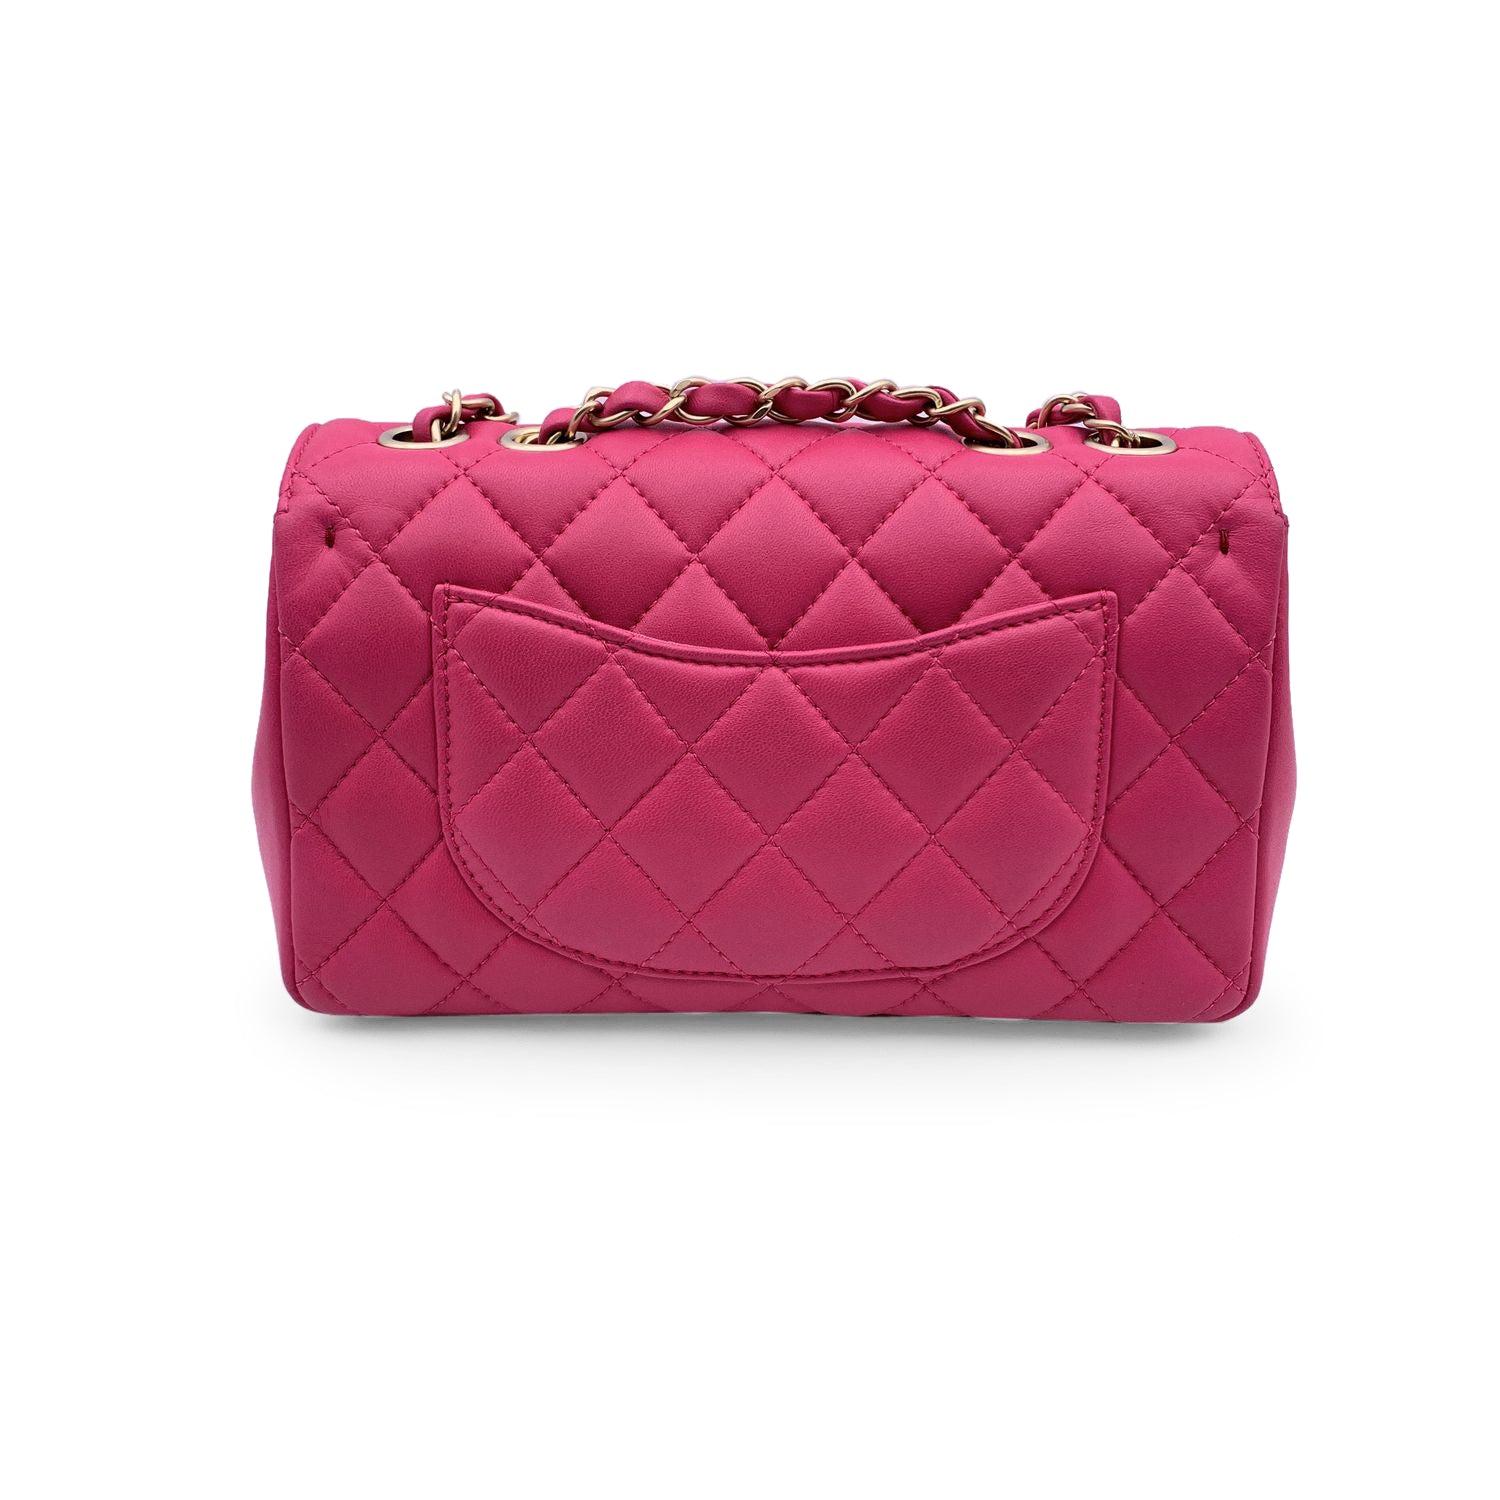 Chanel Pink Quilted Leather Mini Mademoiselle Chic Shoulder Bag For Sale 1